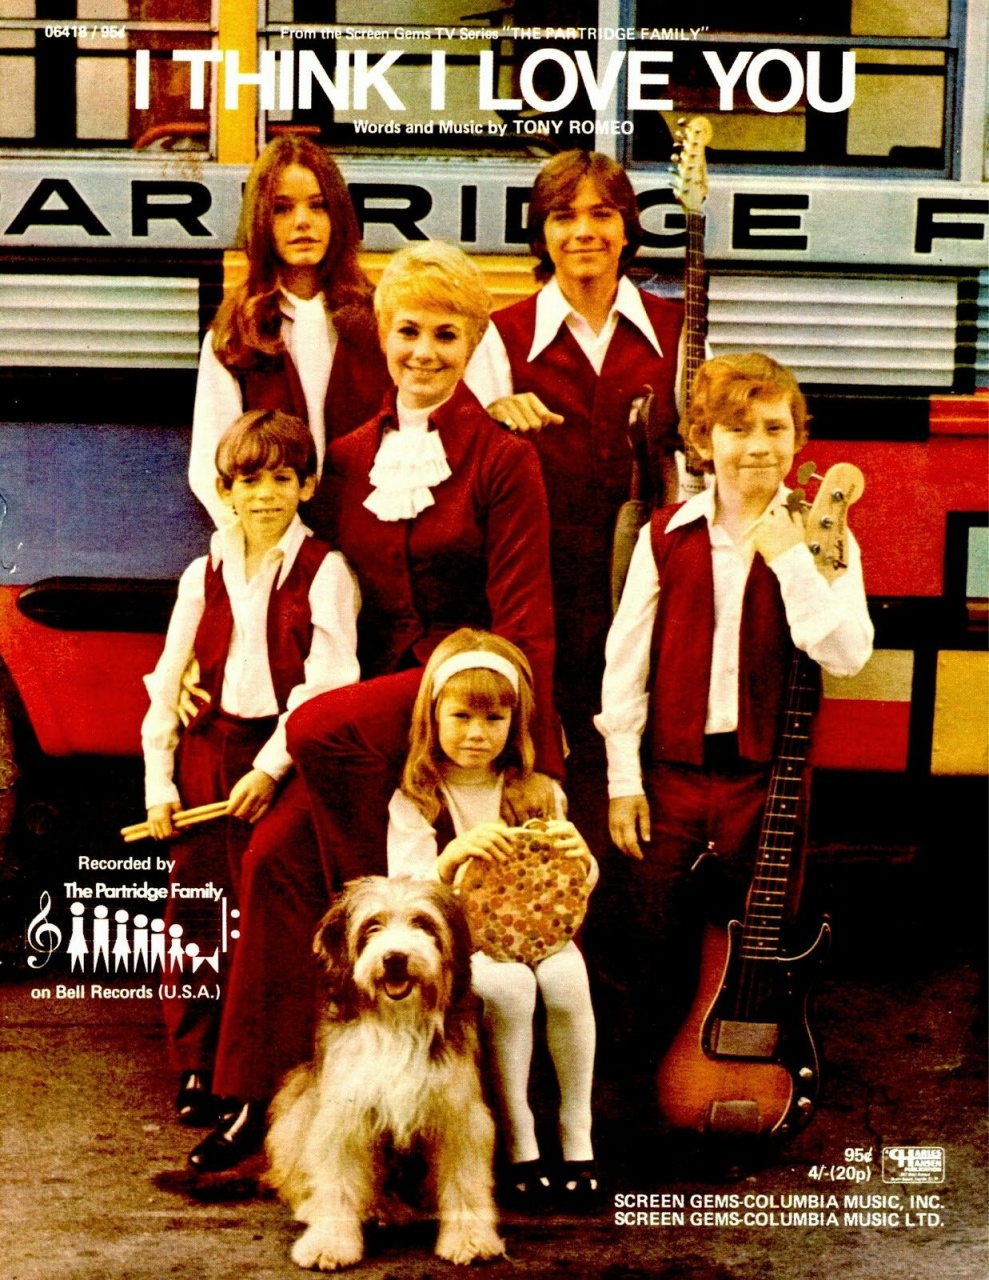 The Partridge Family's first single, I Think I Love You.